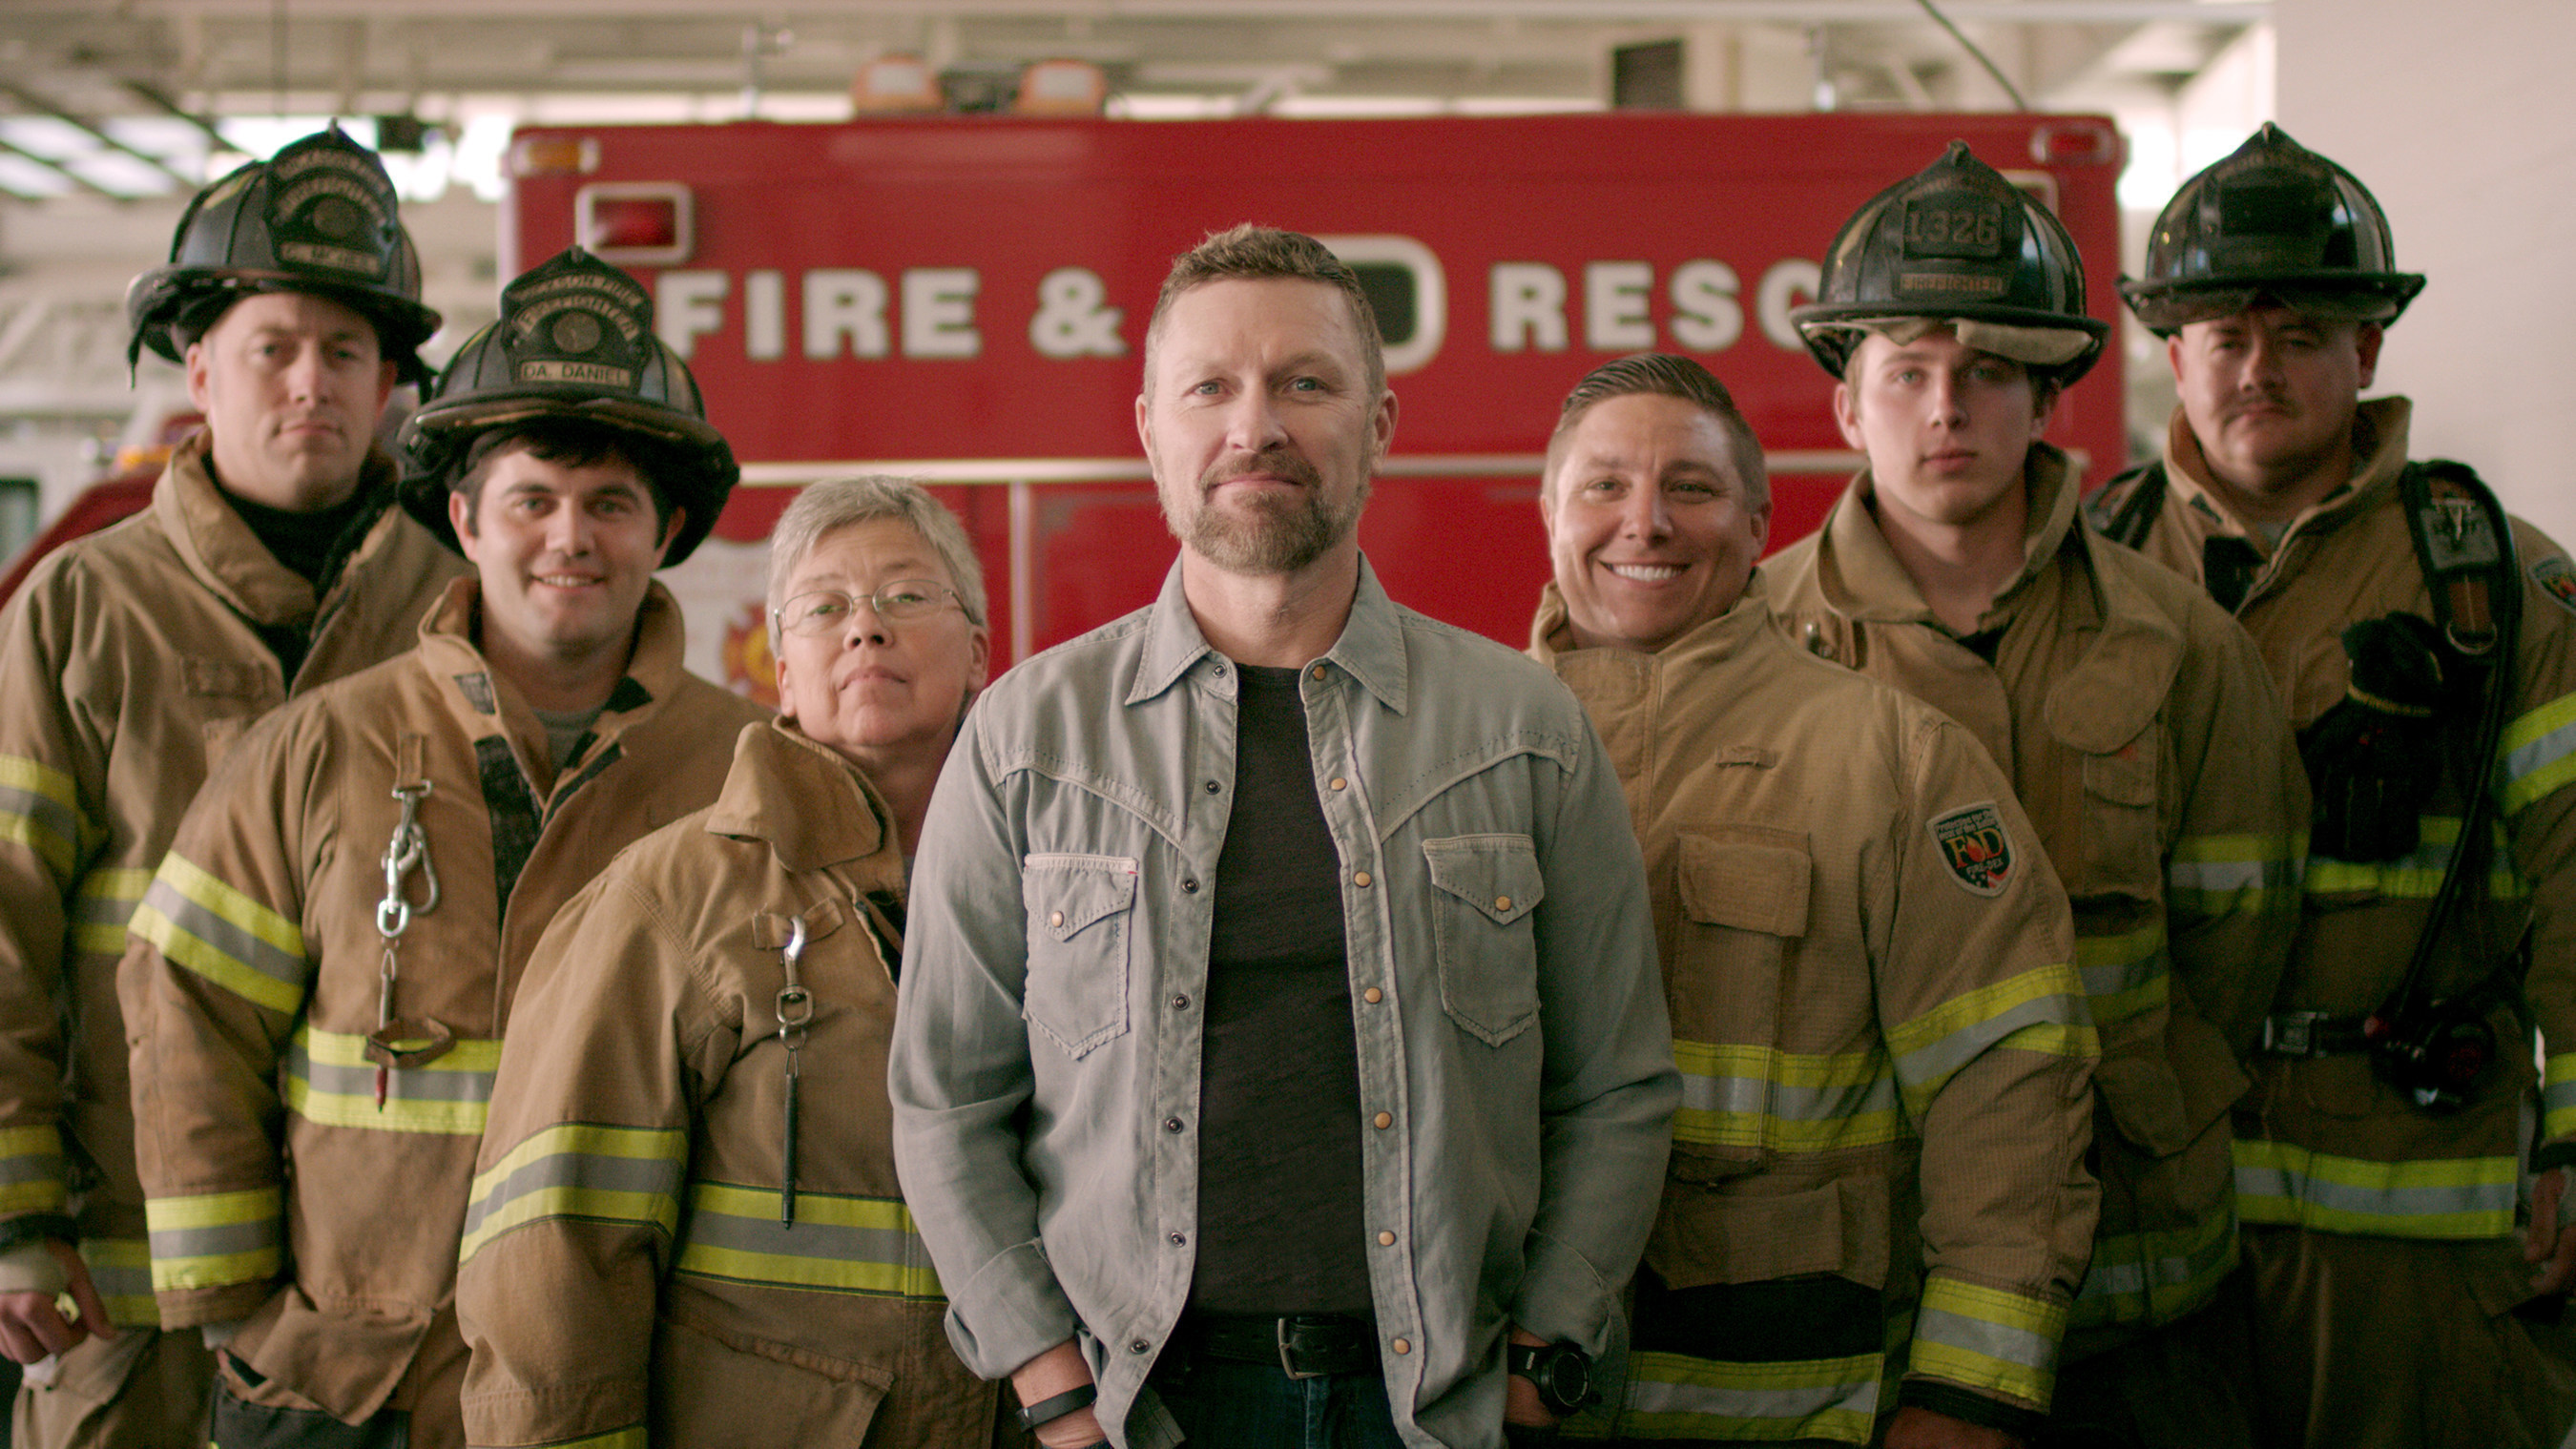 Kidde Fire Safety has teamed up with Craig Morgan, Country Music star and former first responder, Firehouse, the International Association of Fire Chiefs (IAFC), the National Fire Protection Association (NFPA) and National Fallen Firefighters Foundation to launch Step Up and Stand Out, a national campaign to increase awareness of the need for volunteer firefighters. To learn more, go to www.firehouse.com/vf.